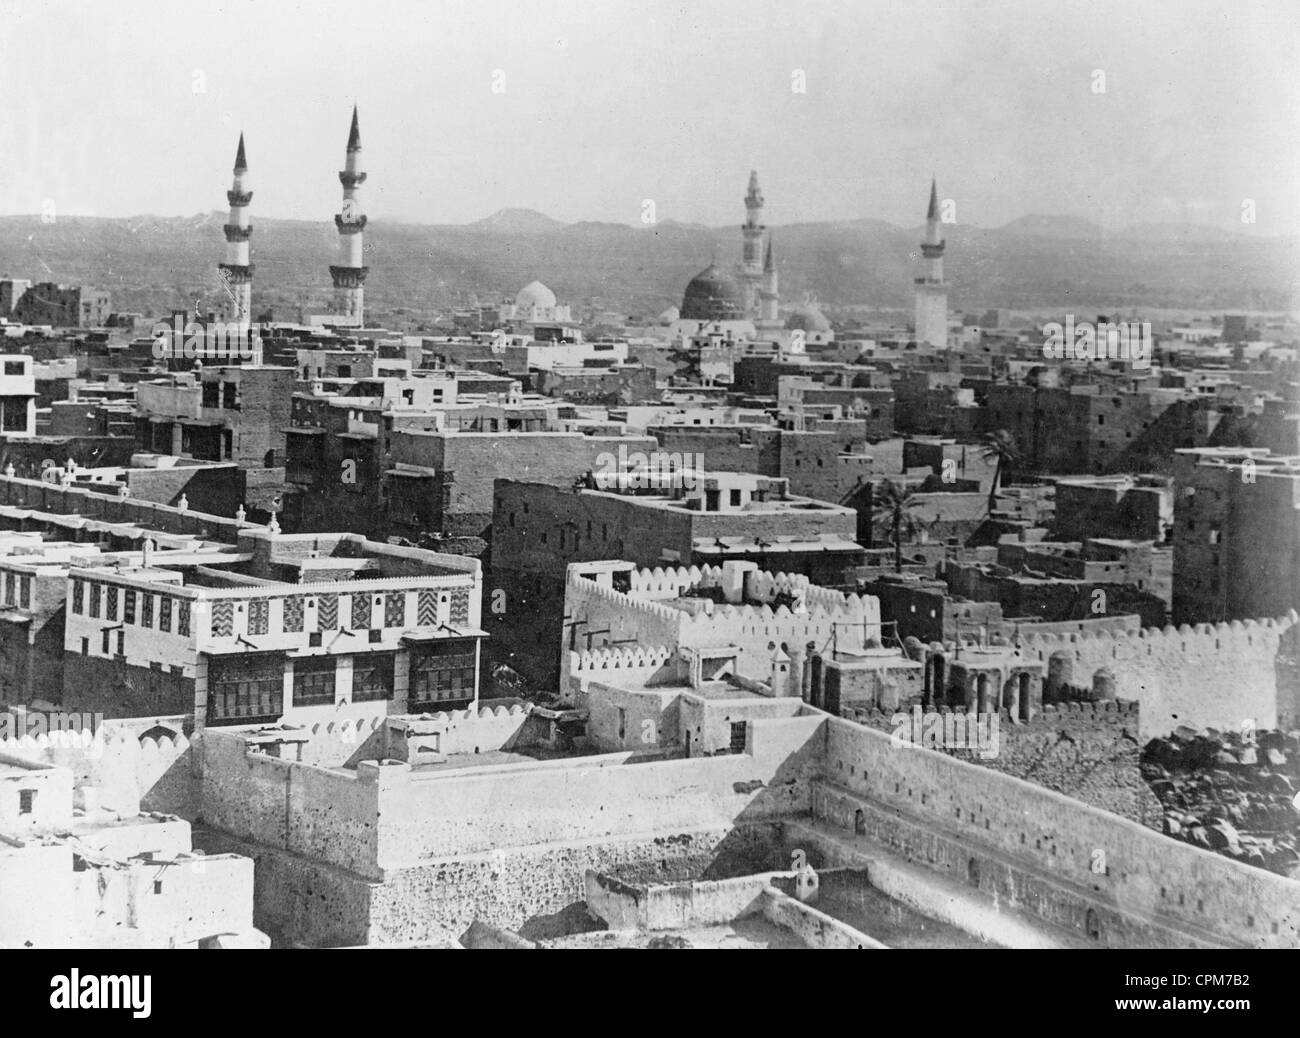 View of Medina under the control of the Ottoman Empire, 1916 (b/w photo) Stock Photo